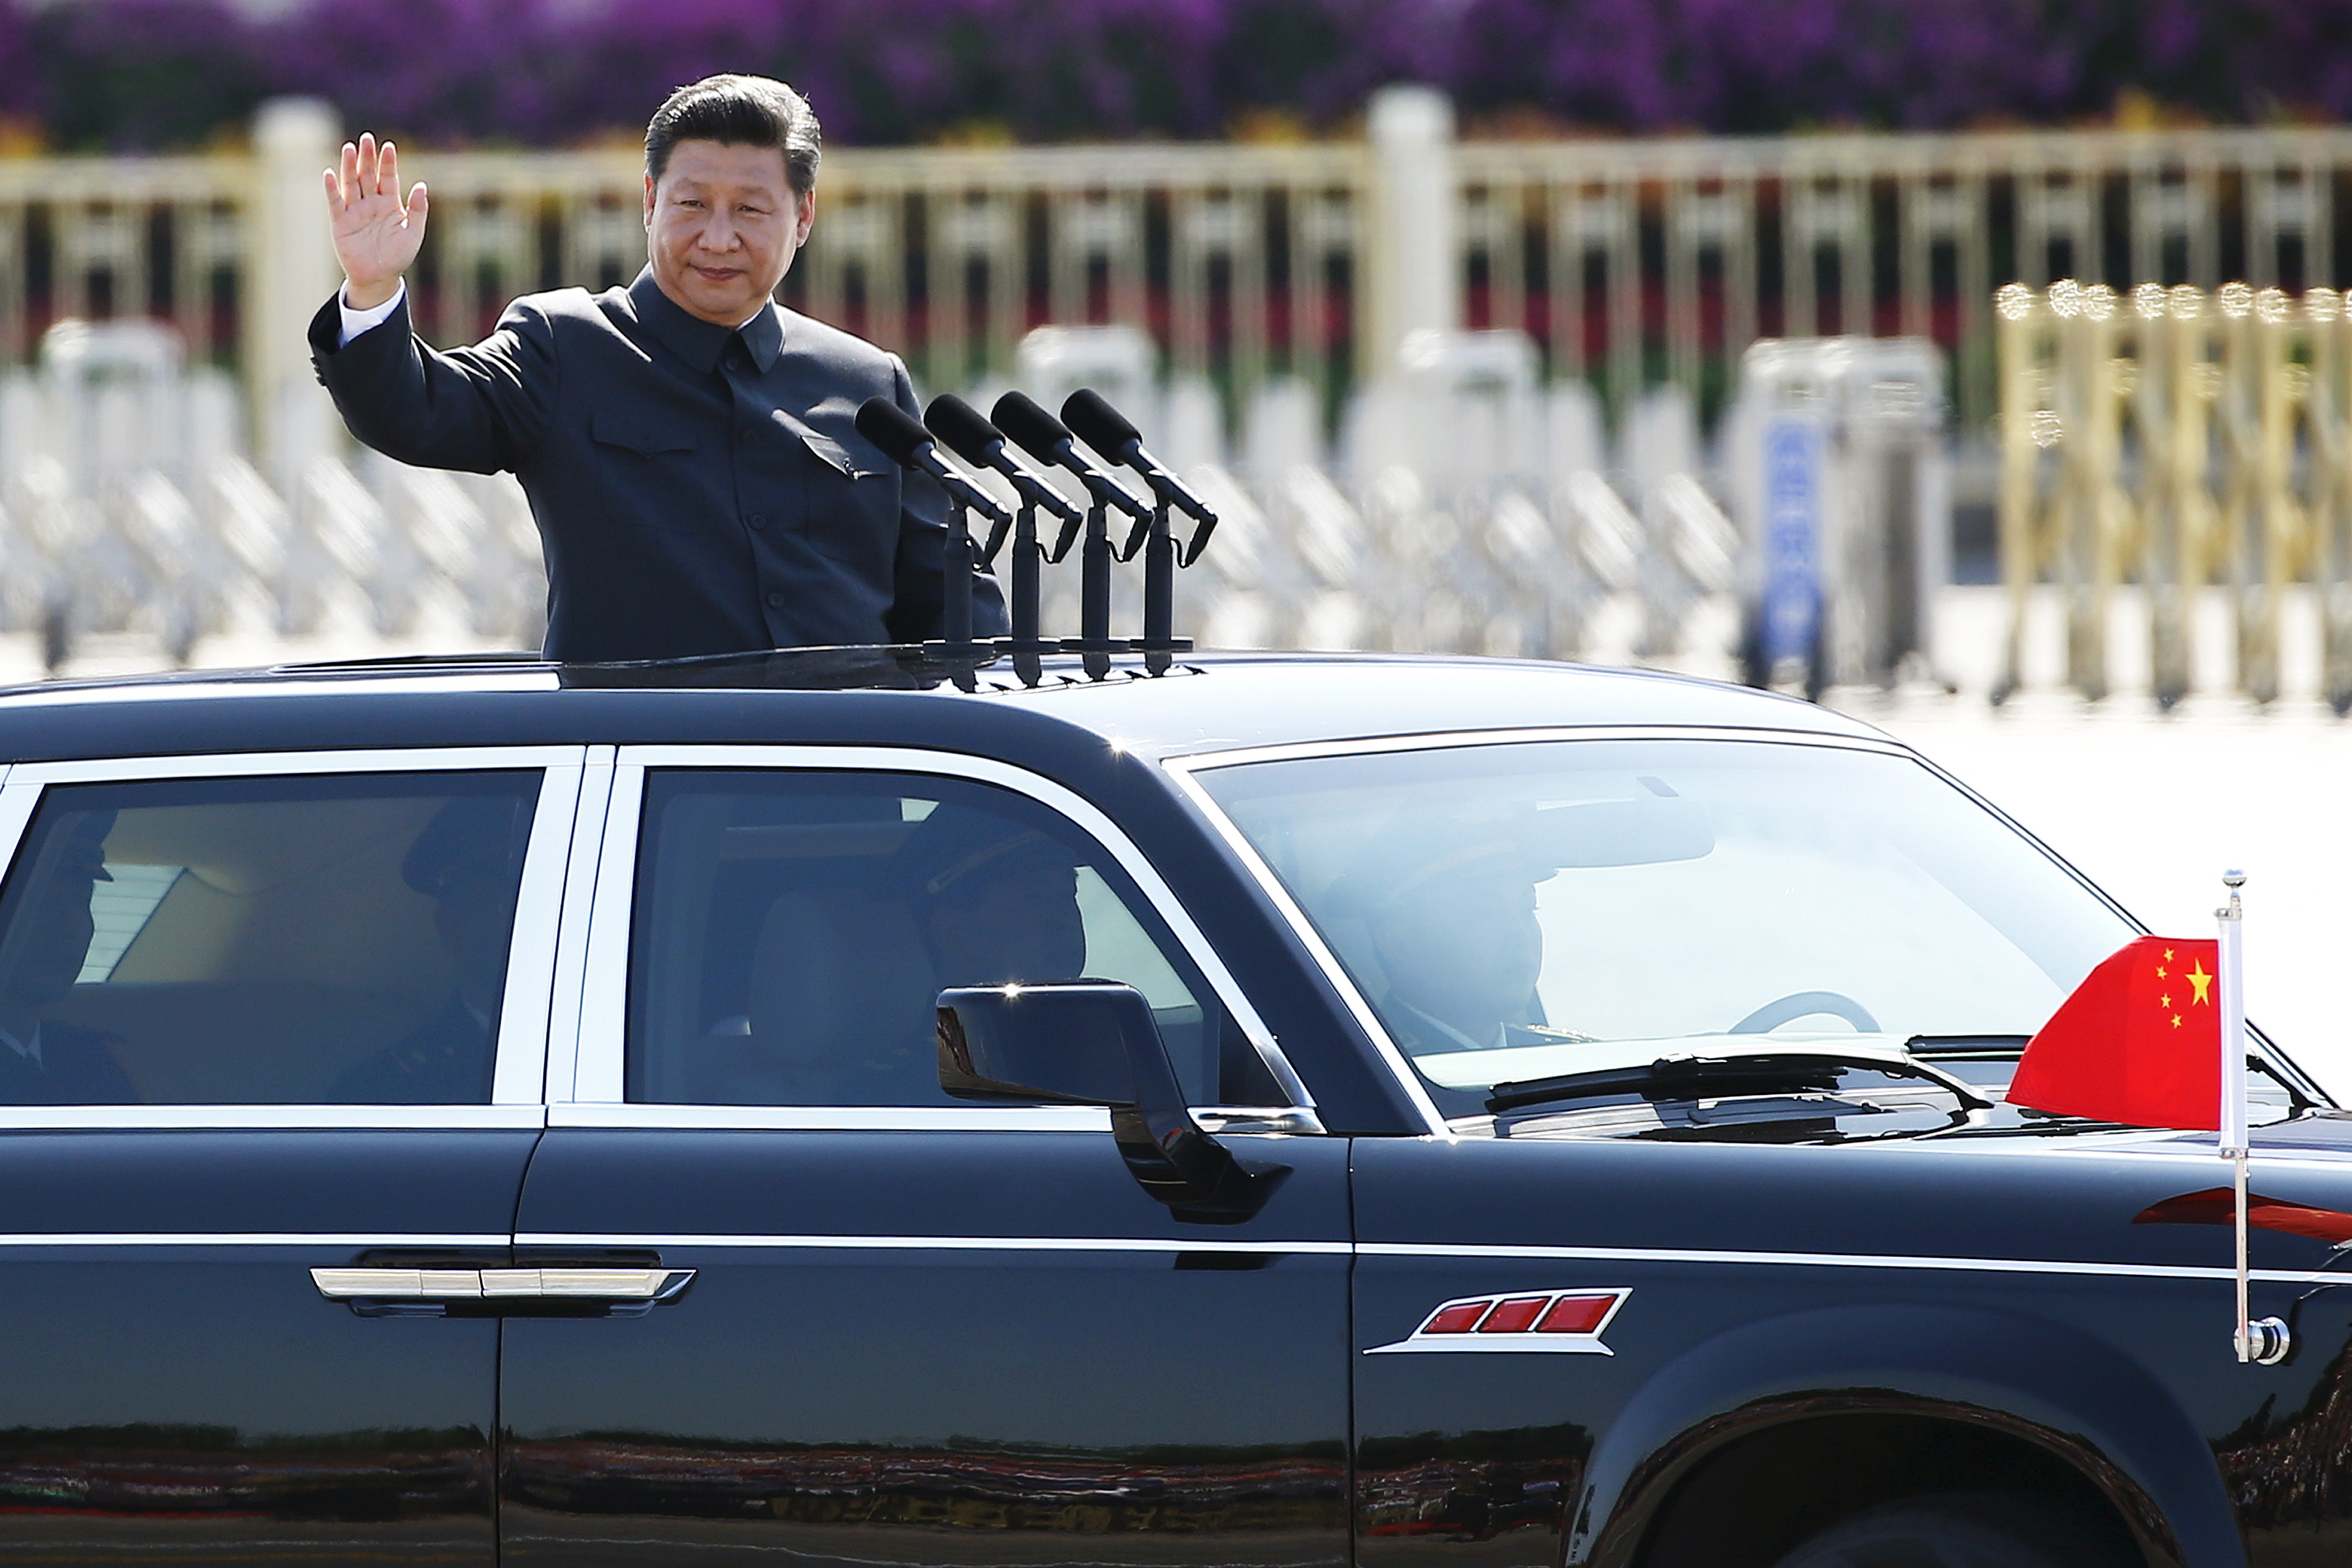 Chinese President Xi Jinping waves as he reviews the army, at the beginning of the military parade marking the 70th anniversary of the end of World War Two, in Beijing, China, September 3, 2015. (Damir Sagolj —REUTERS)